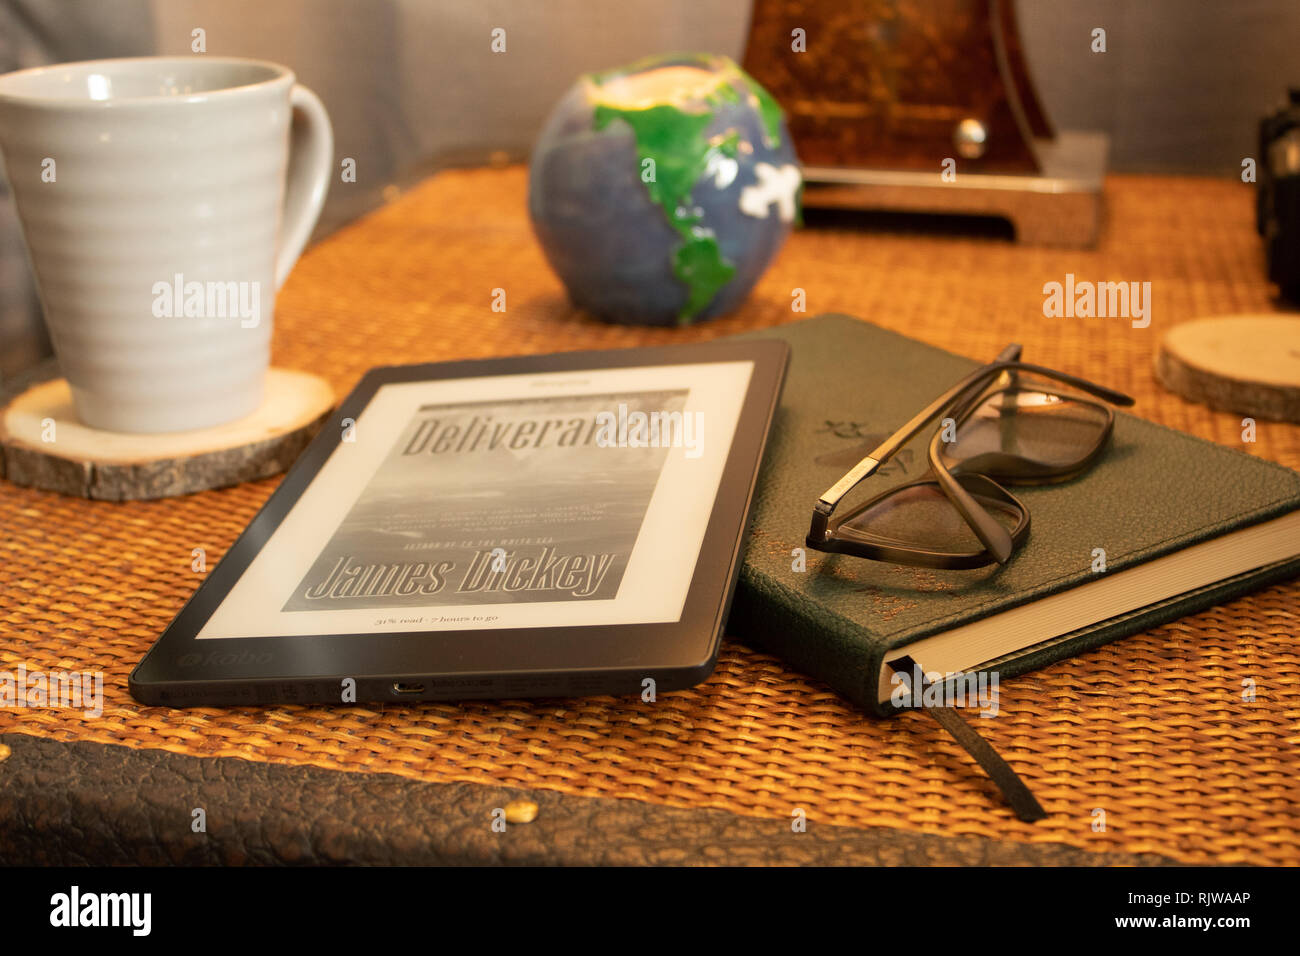 Side table with E-Book, coffee mug, eye glasses and candle. Stock Photo